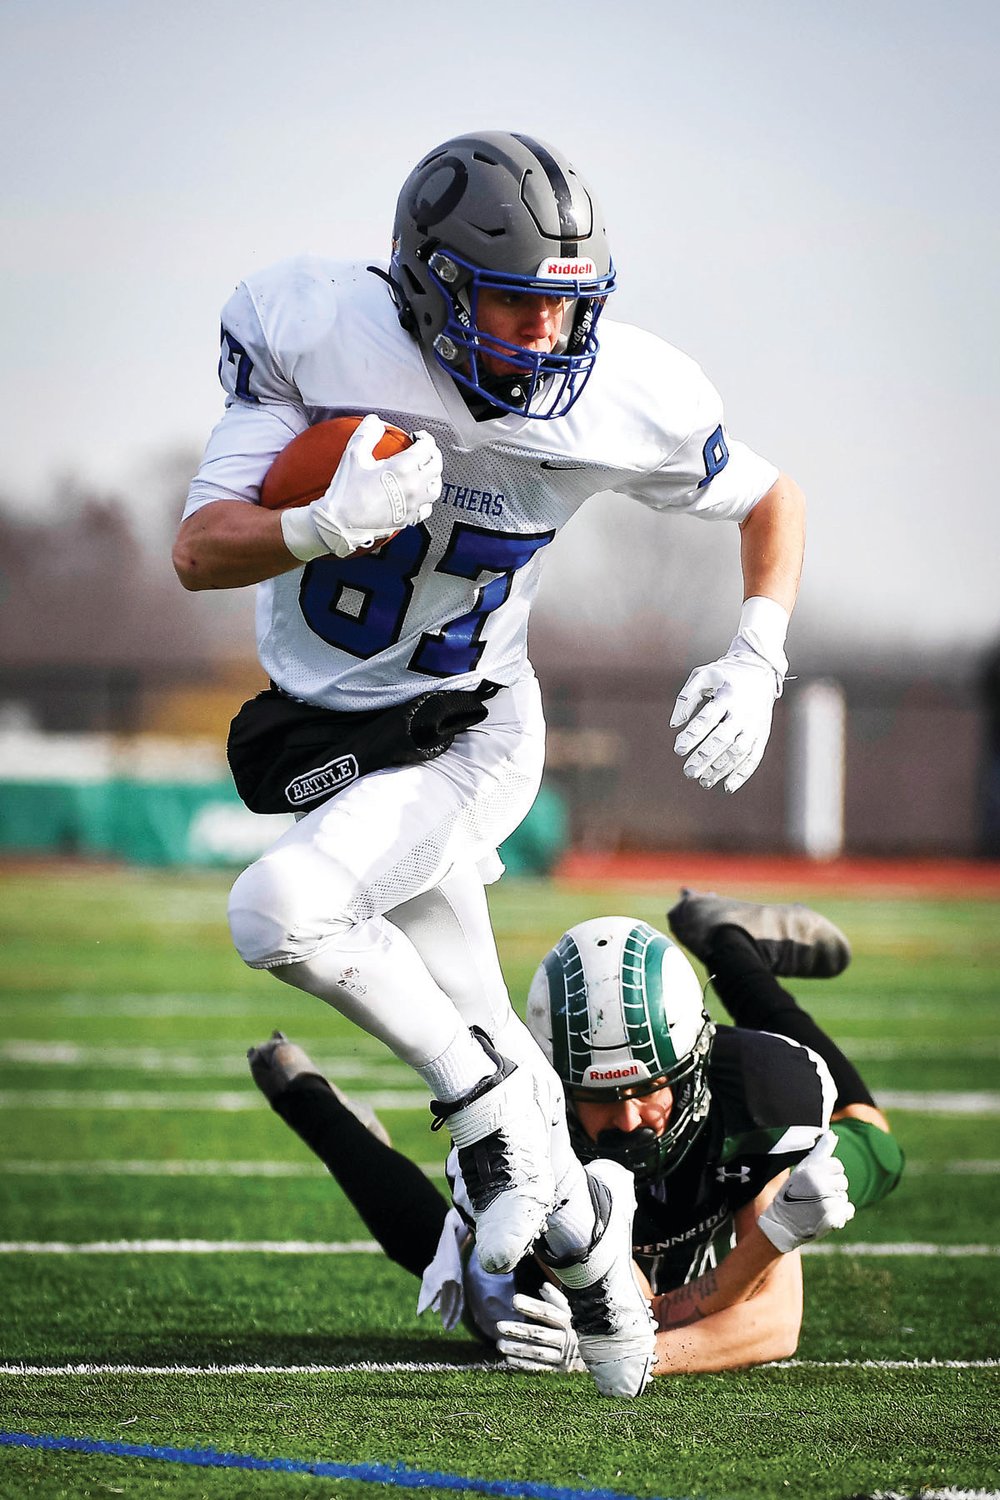 Quakertown’s Zach Fondl breaks a tackle on a pass from Will Steich.